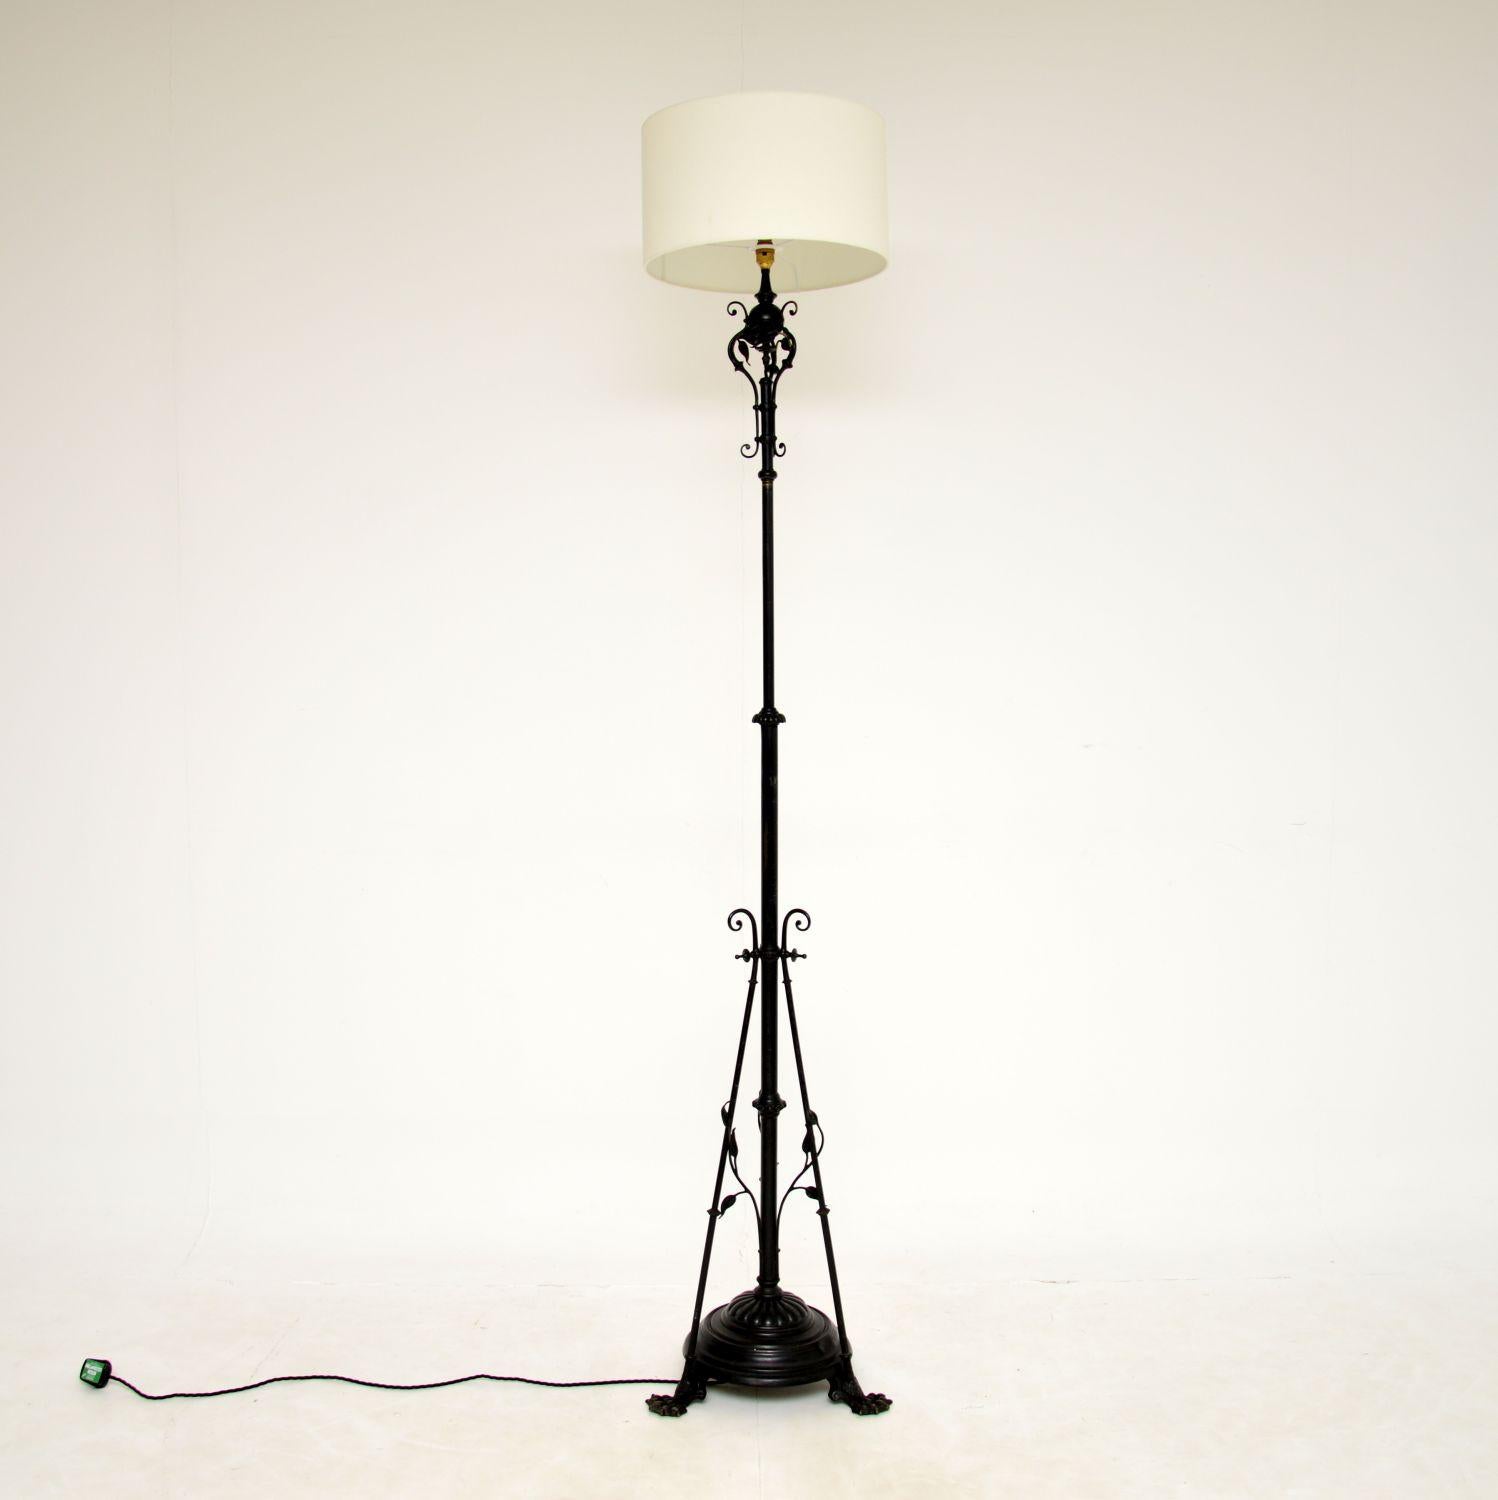 A beautiful original Art Nouveau period rise and fall floor lamp in ebonised iron. This was made in England, it dates from around 1900-1910.

The quality is amazing, this has stunning and intricate detail, it is very strong and heavy. The column has